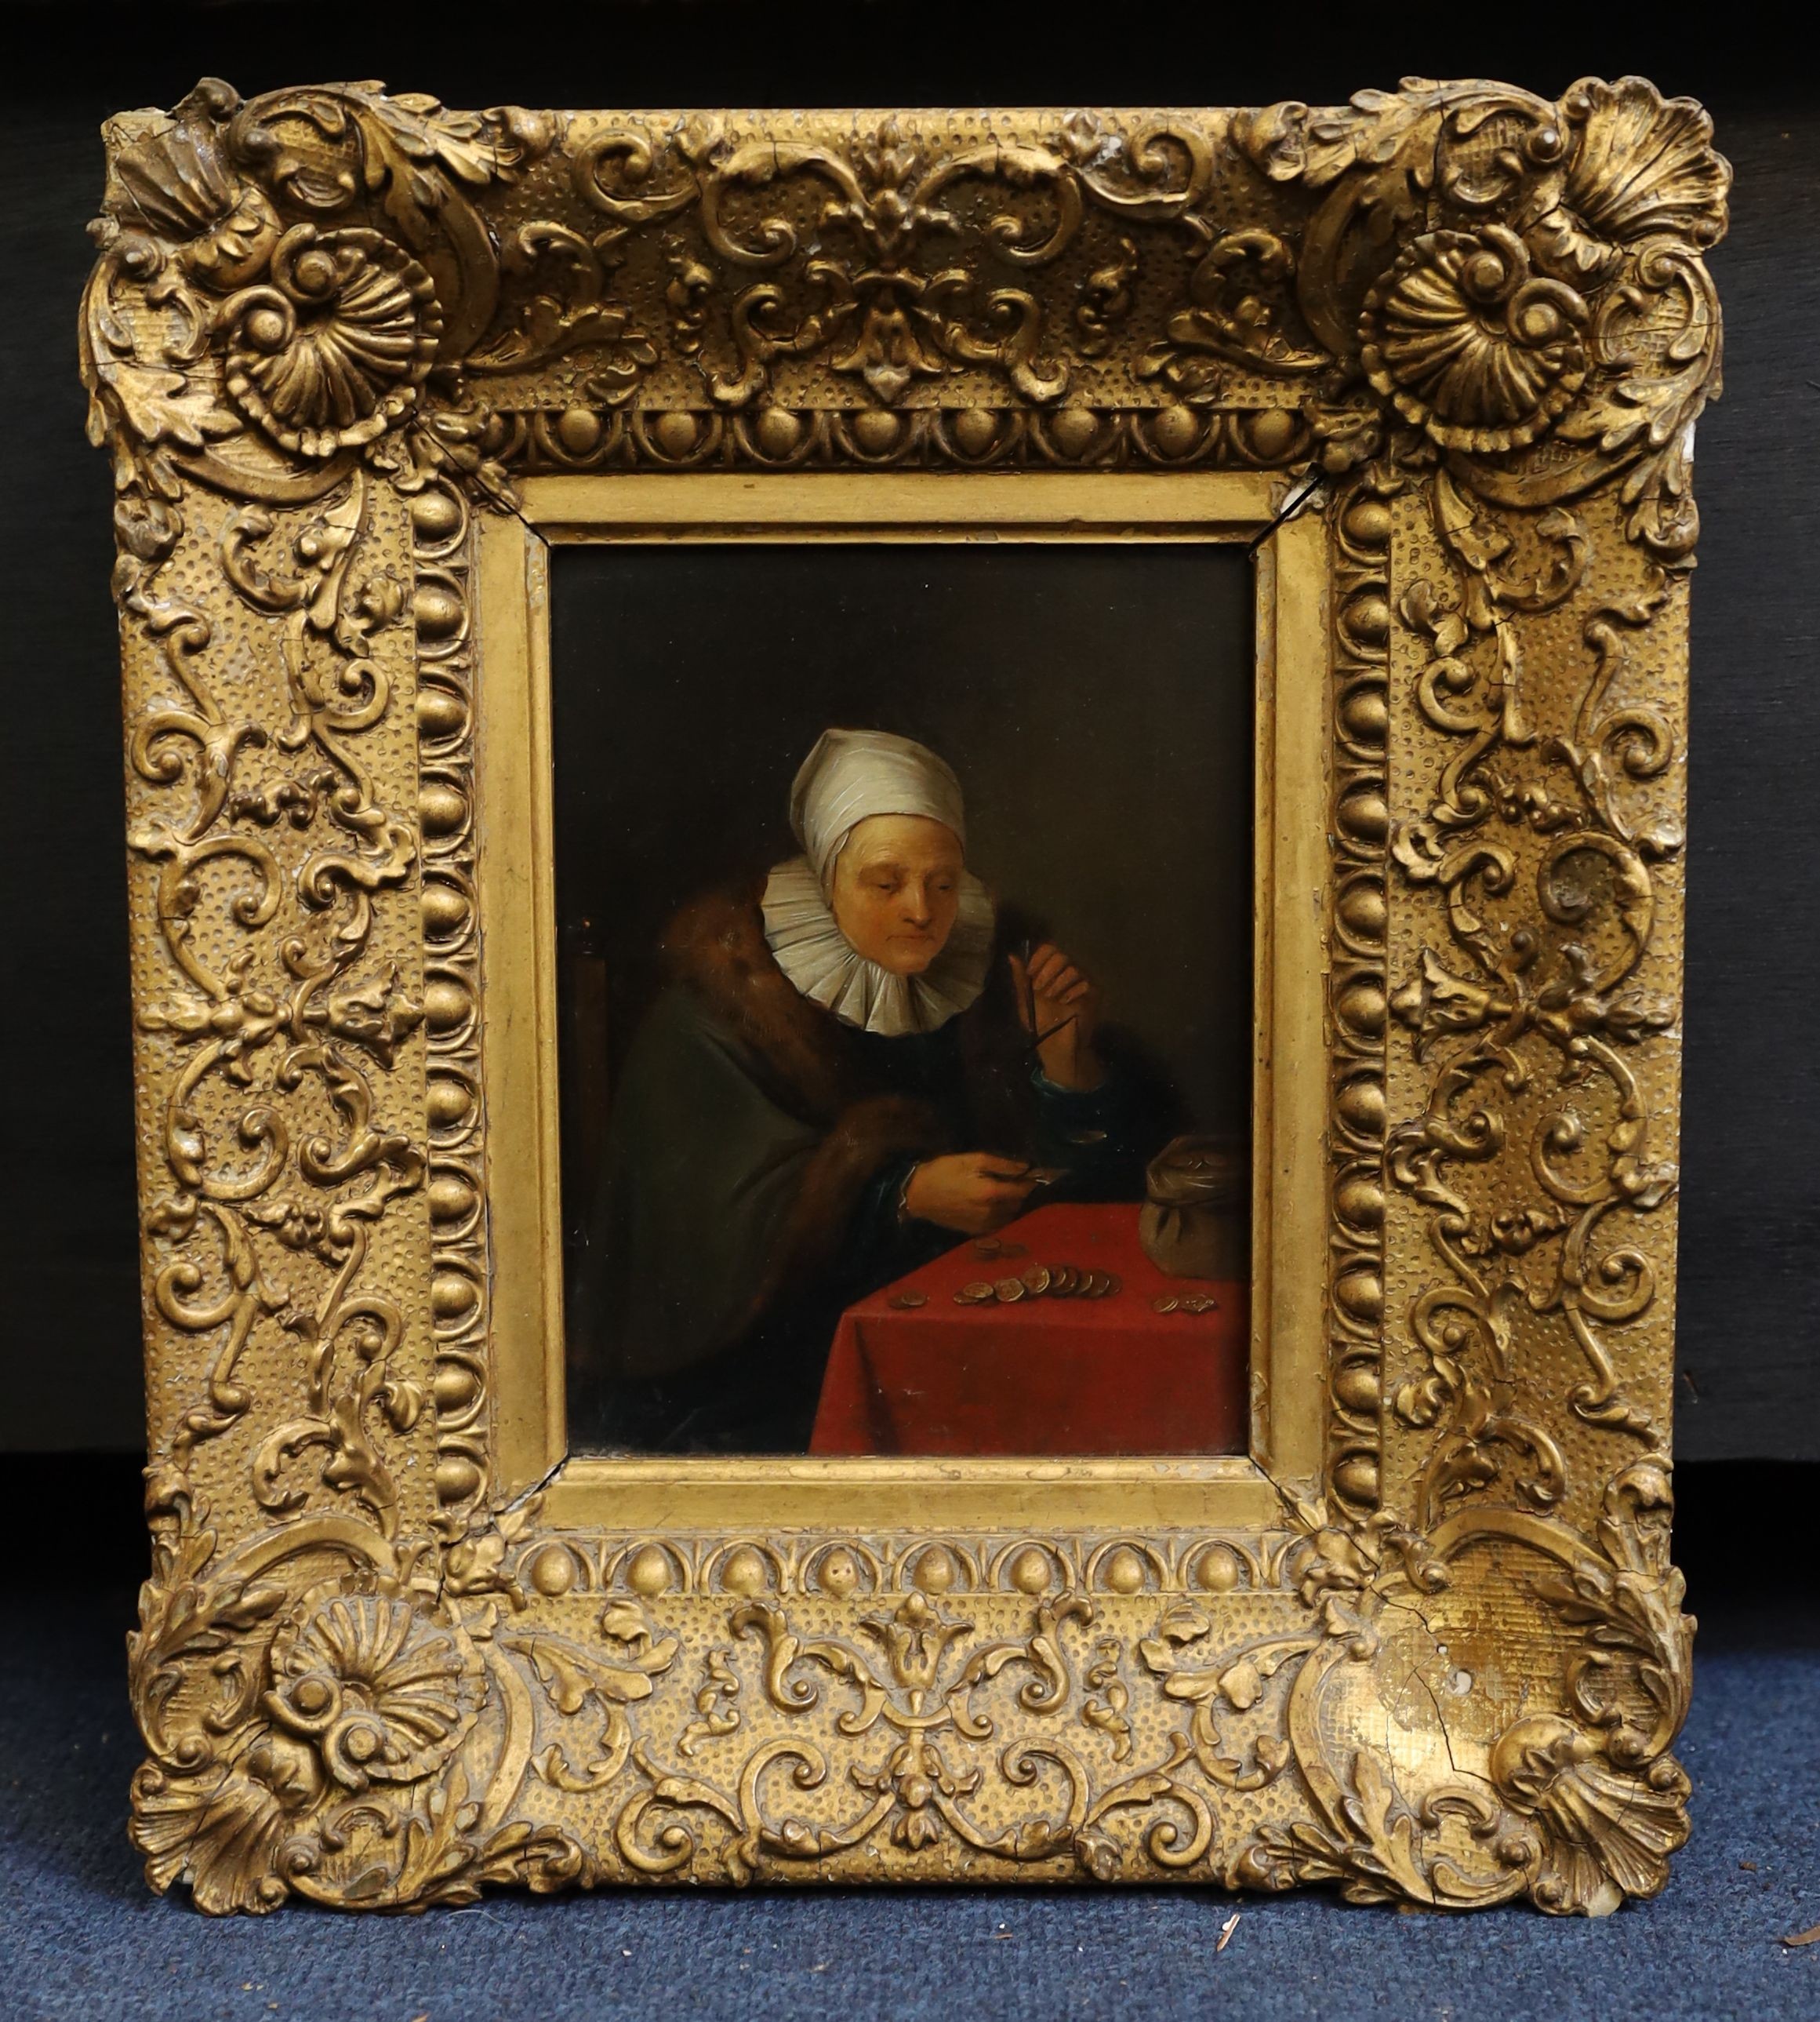 18th century Flemish School, Woman seated at a table counting money, oil on wooden panel, 18.5 x 14cm